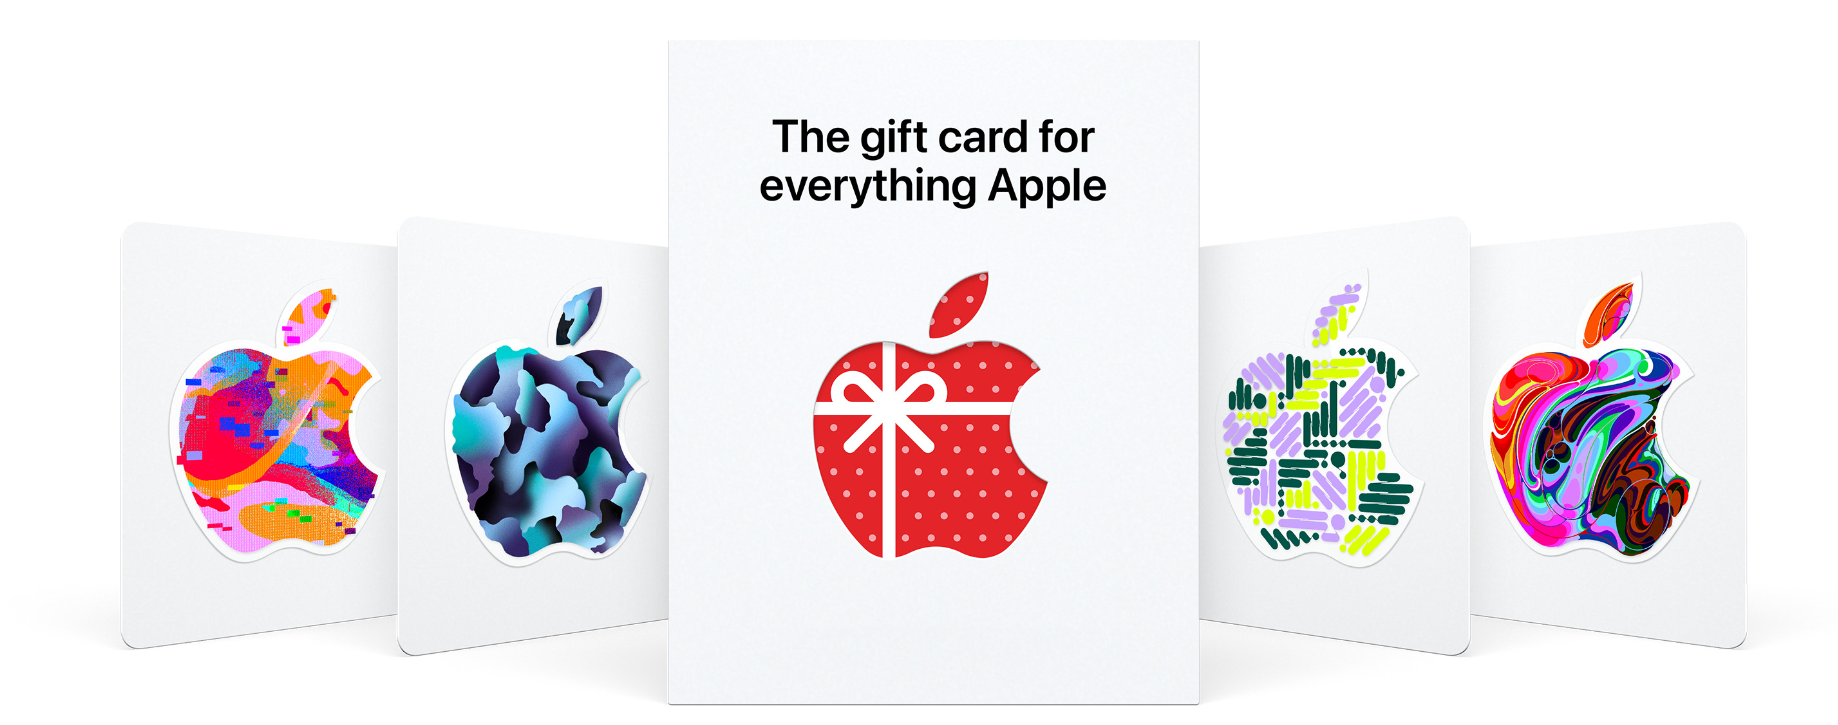 Apple Cyber Shopping Event: Get up to $400 Apple Gift card with your purchases